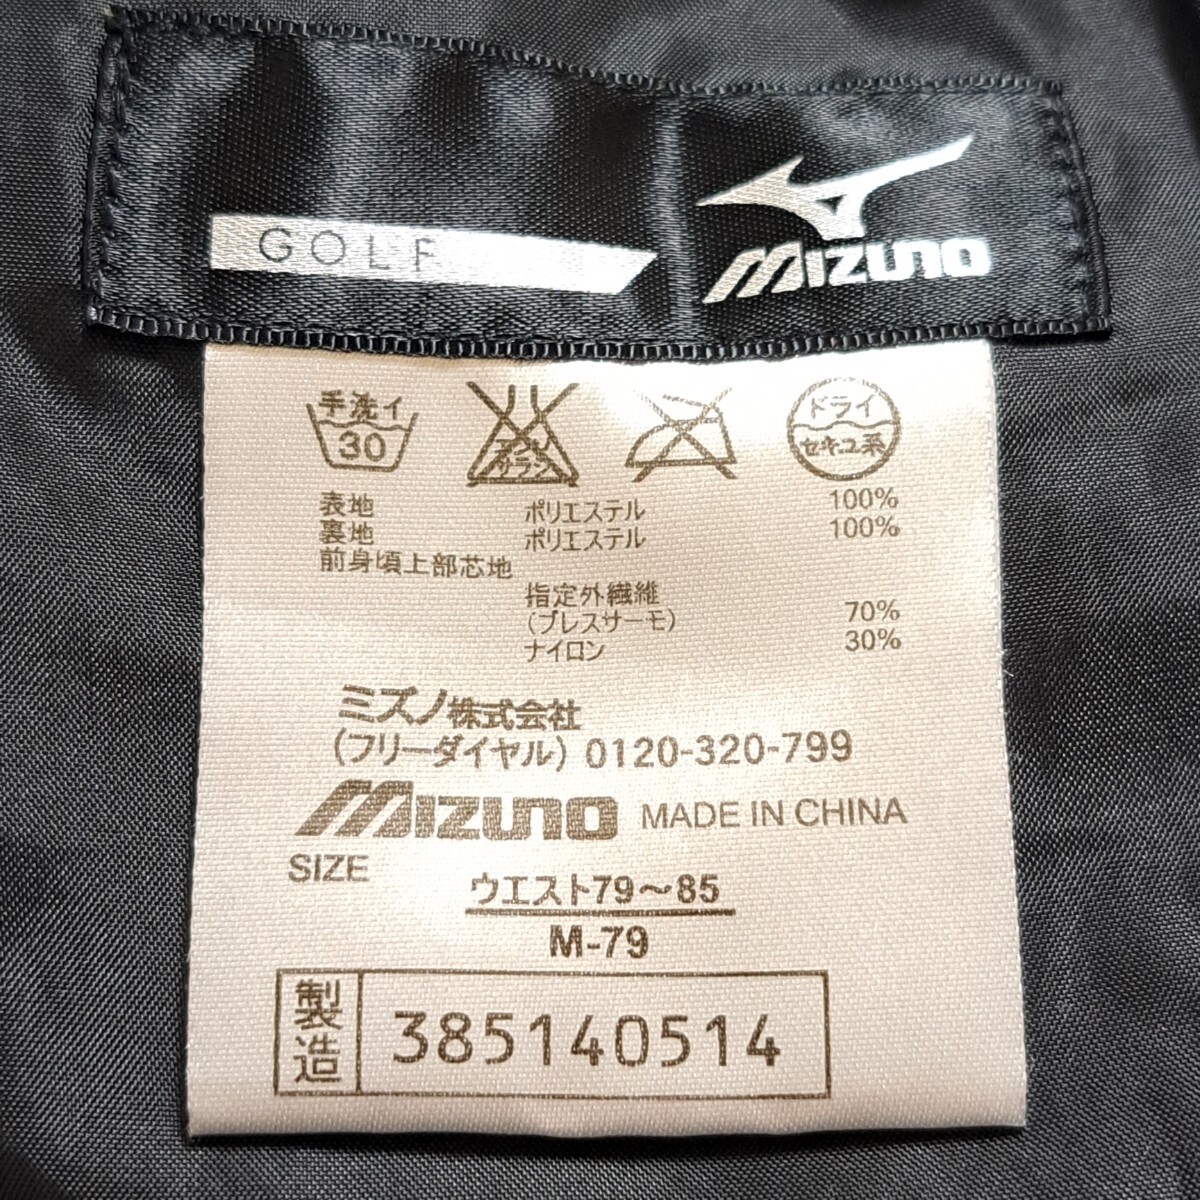 [MIZUNO] Mizuno reverse side nappy pants black black Golf training protection against cold water-repellent breath Thermo put on turning simple gentleman men's size M/Y7534HH